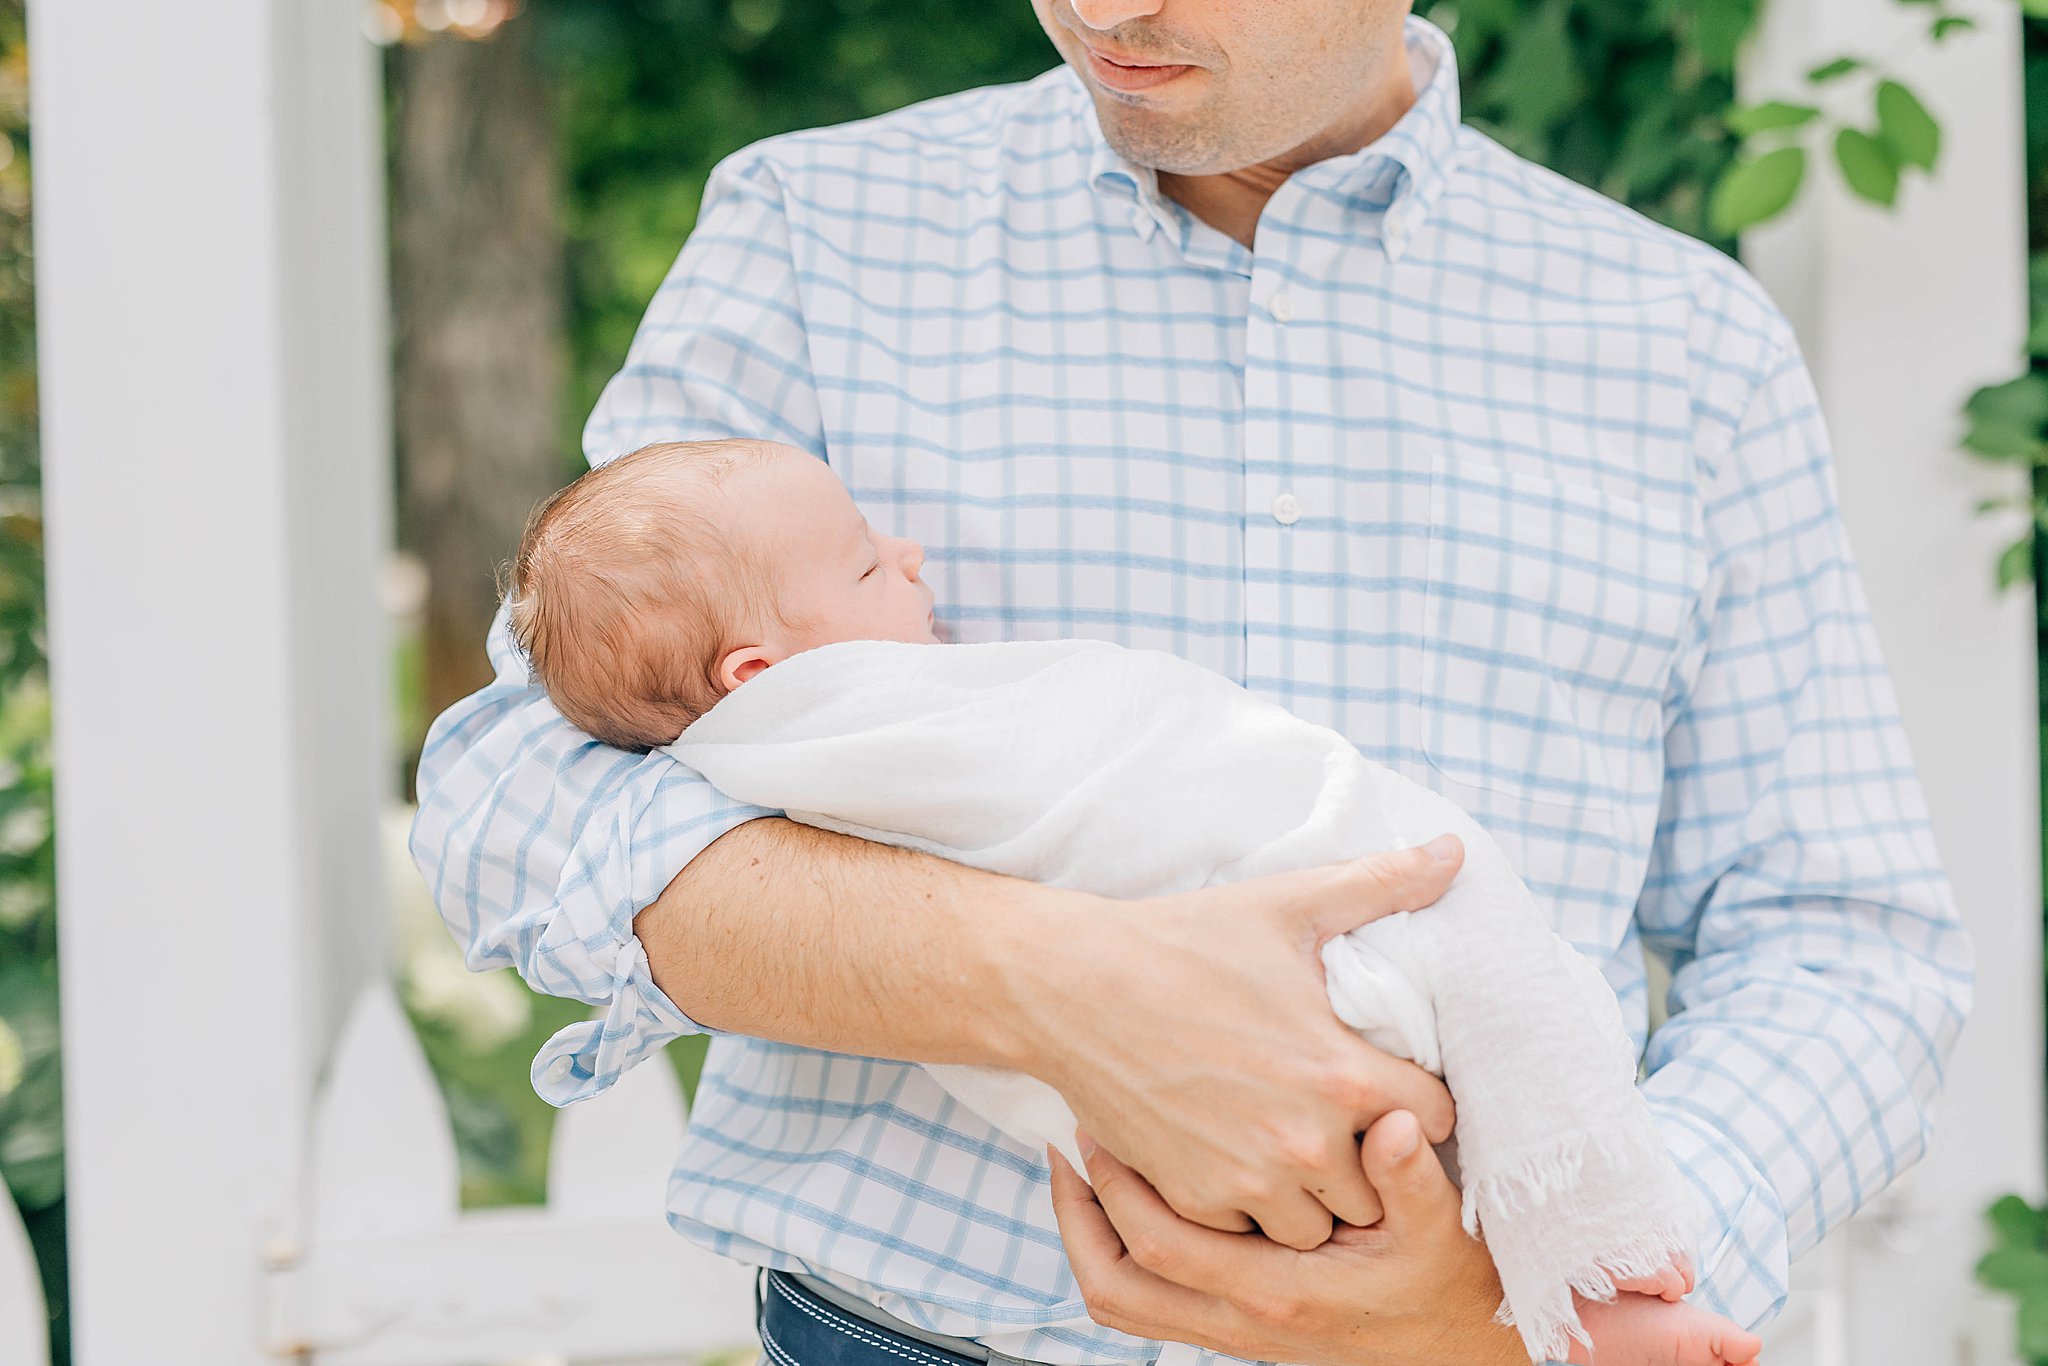 Outdoor newborn photos with dad holding baby.